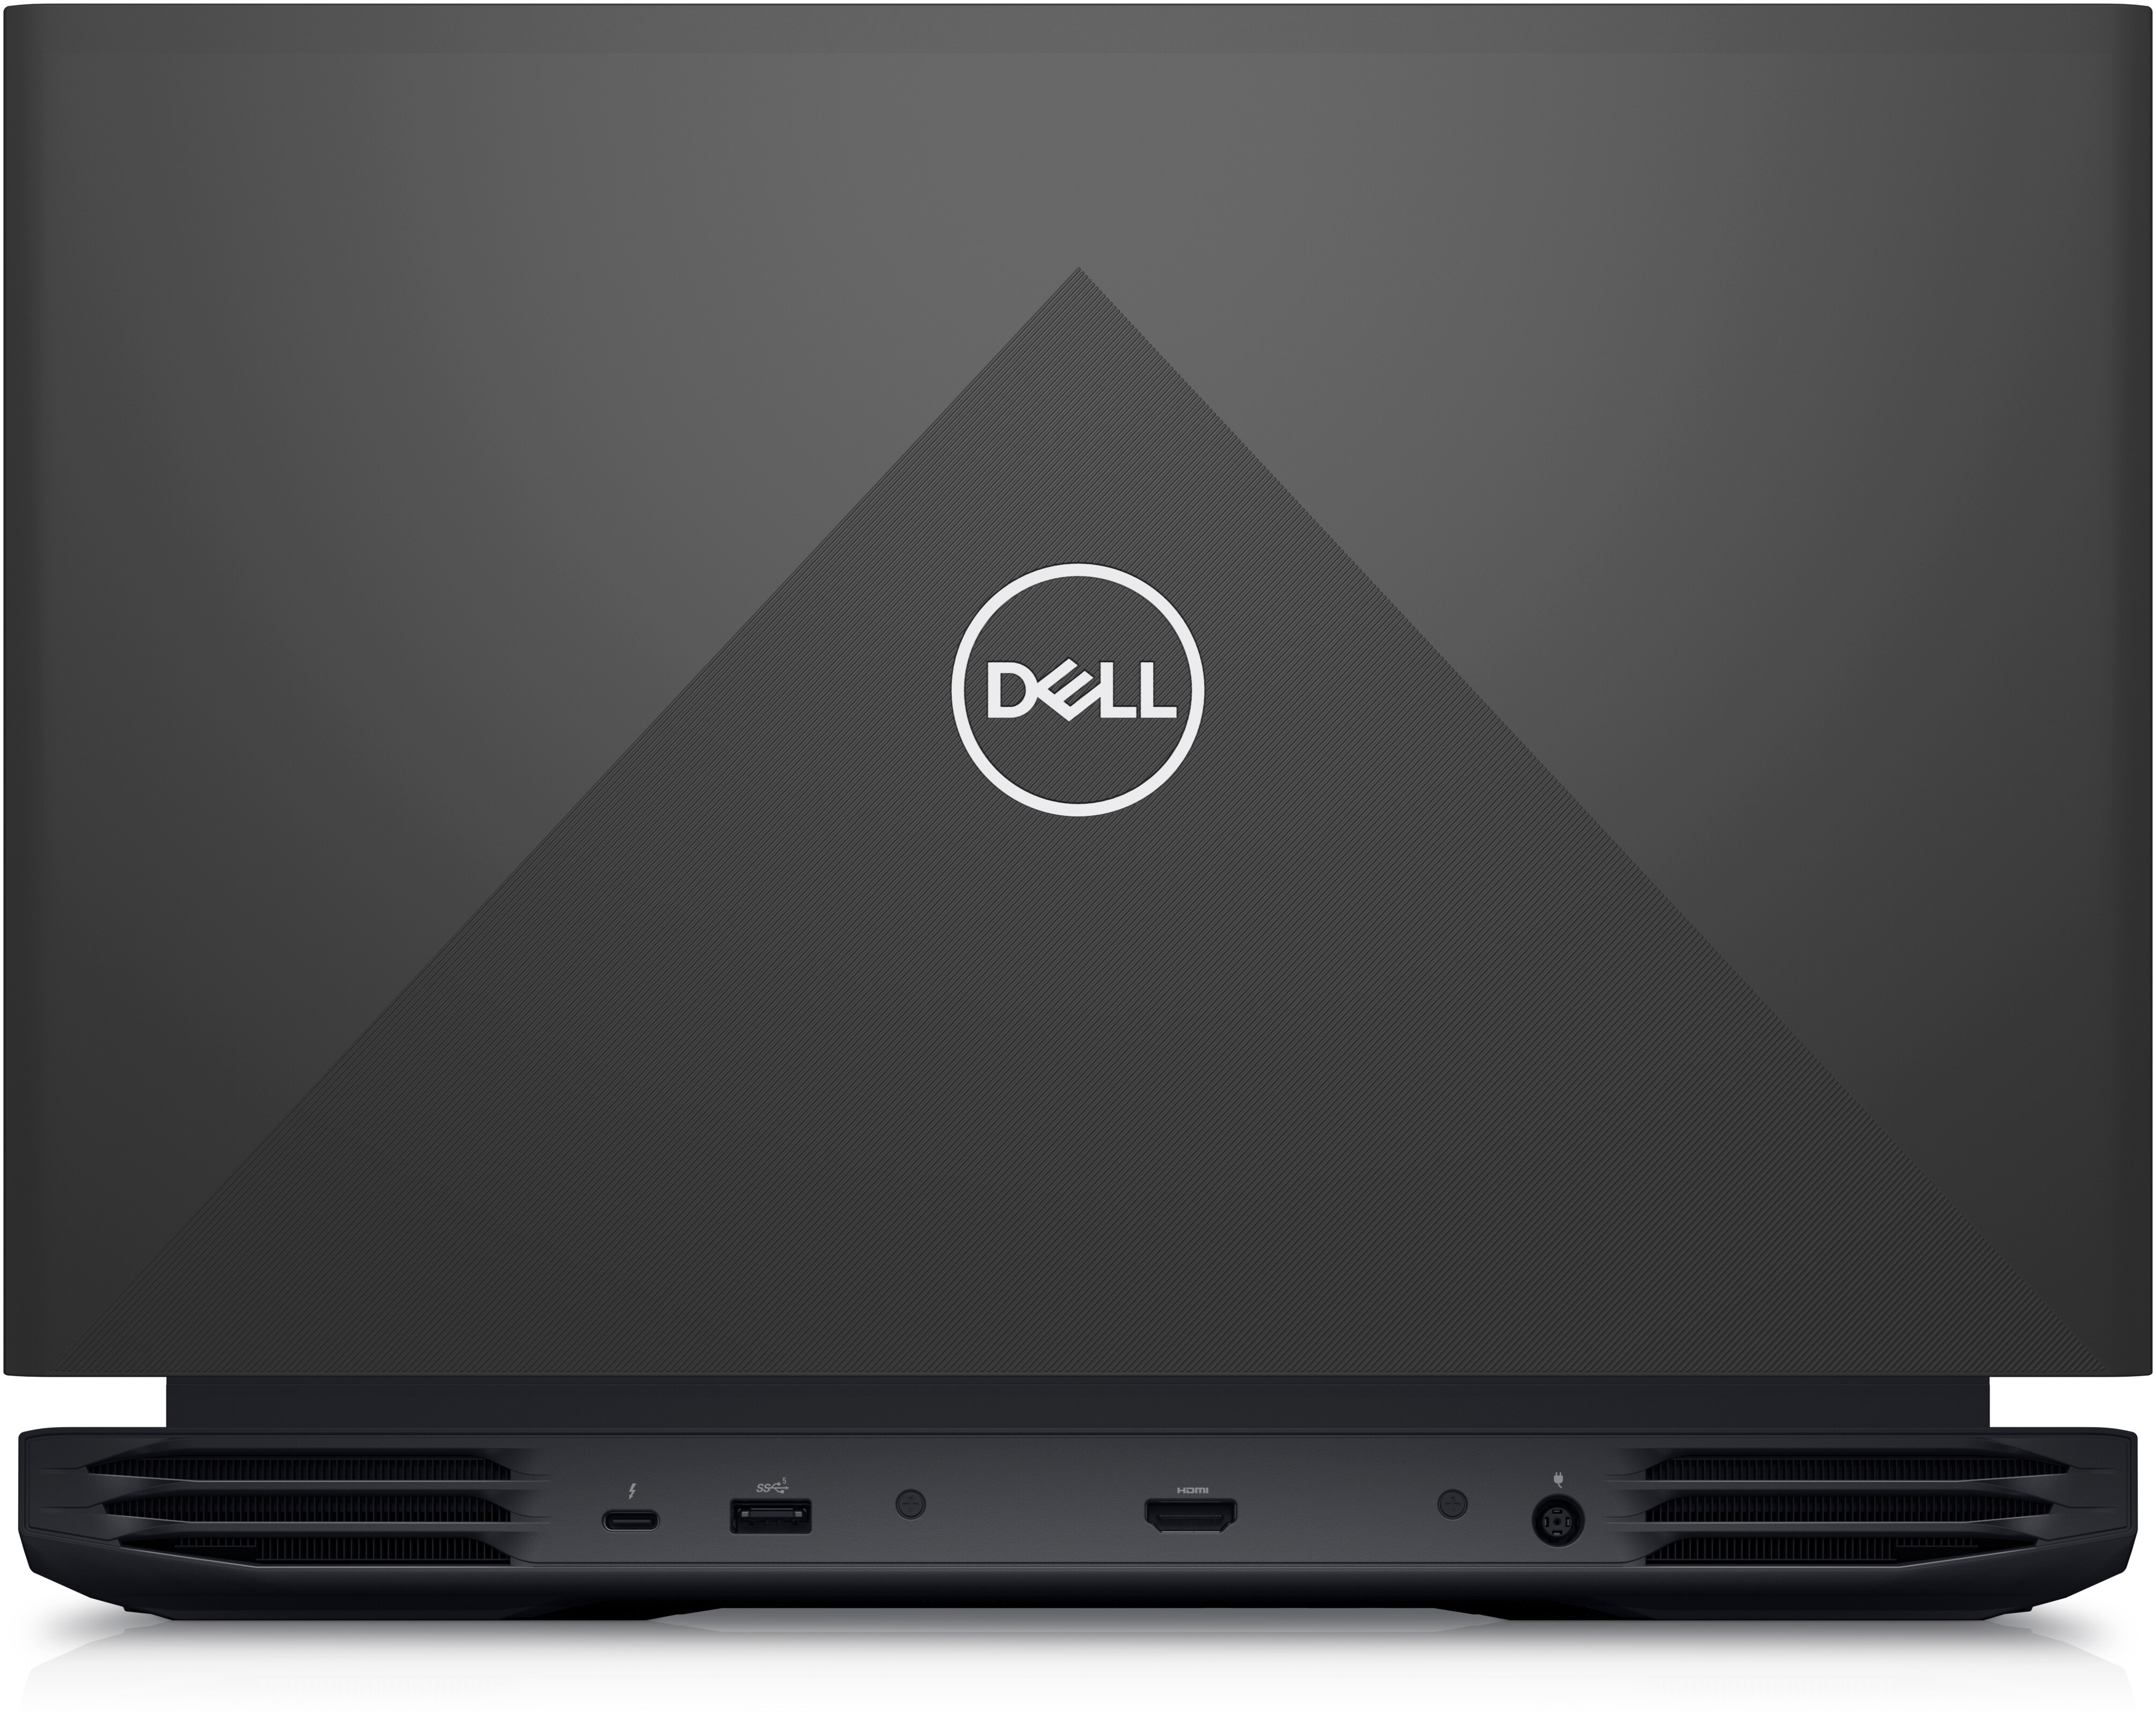 GAMING LAPTOP DELL G15 5520